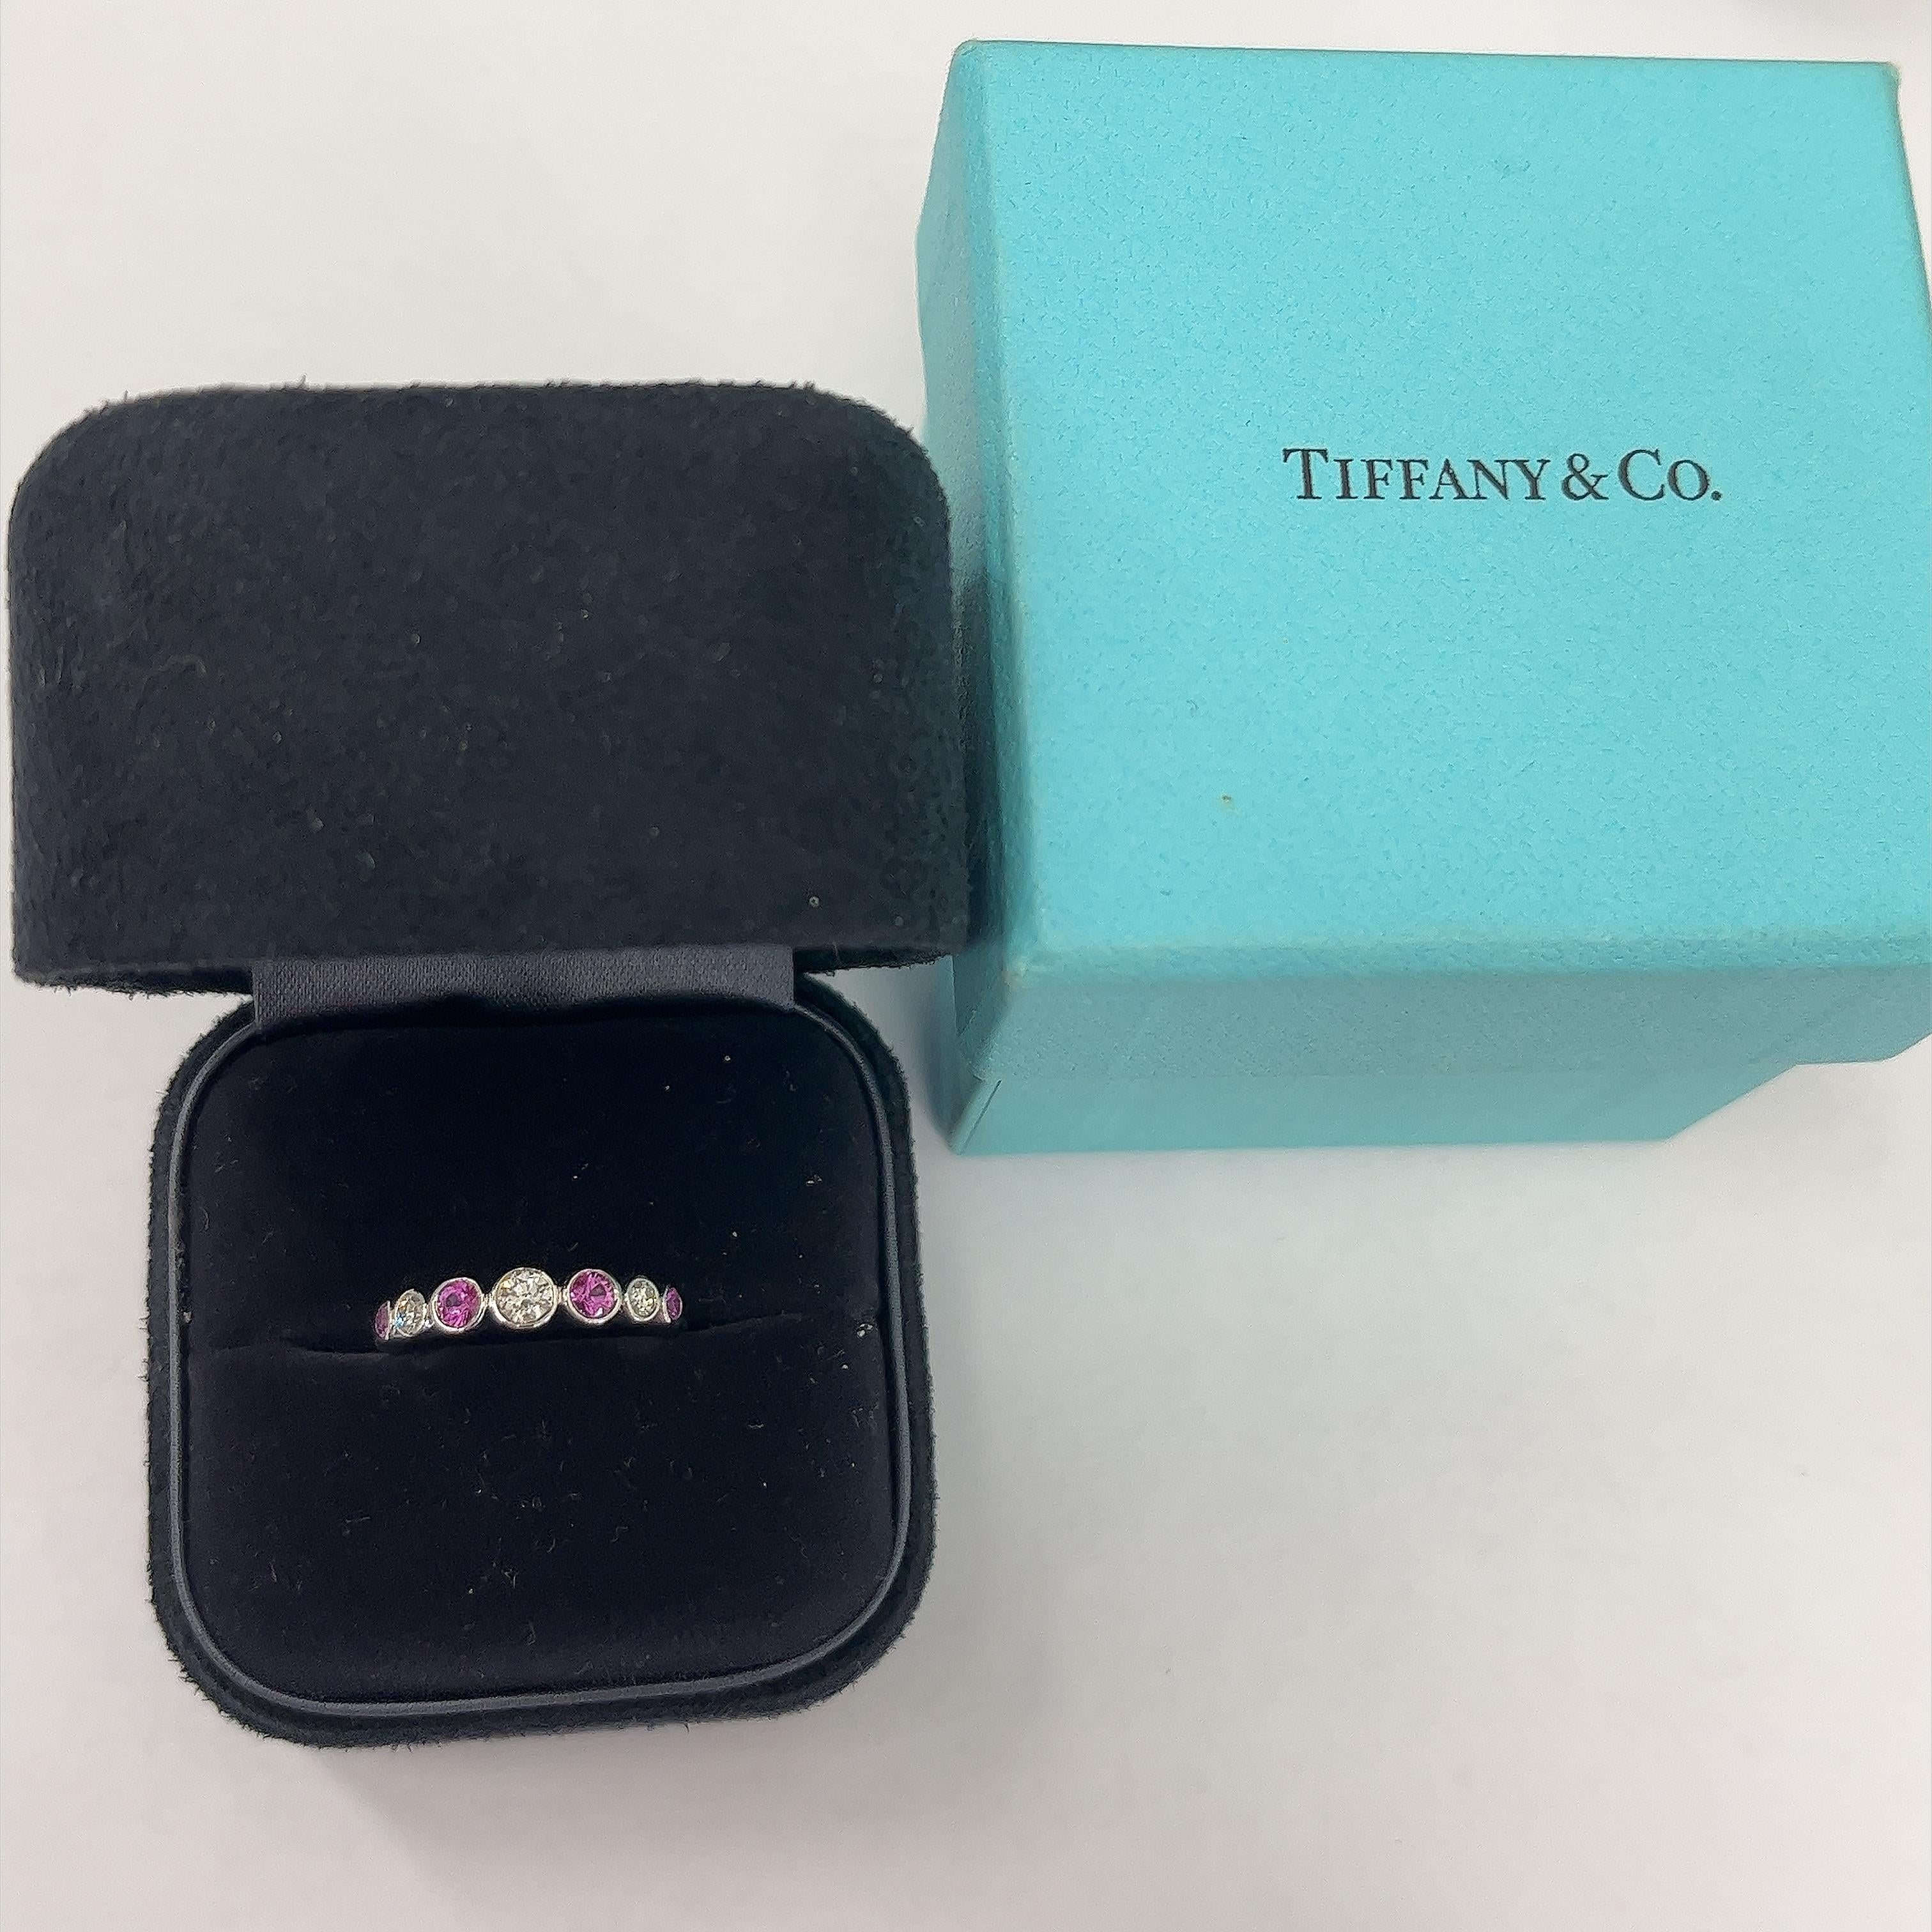 Tiffany & Co. Jazz ring set with 3 Diamonds &4 Pink Sapphires in a graduated set For Sale 5